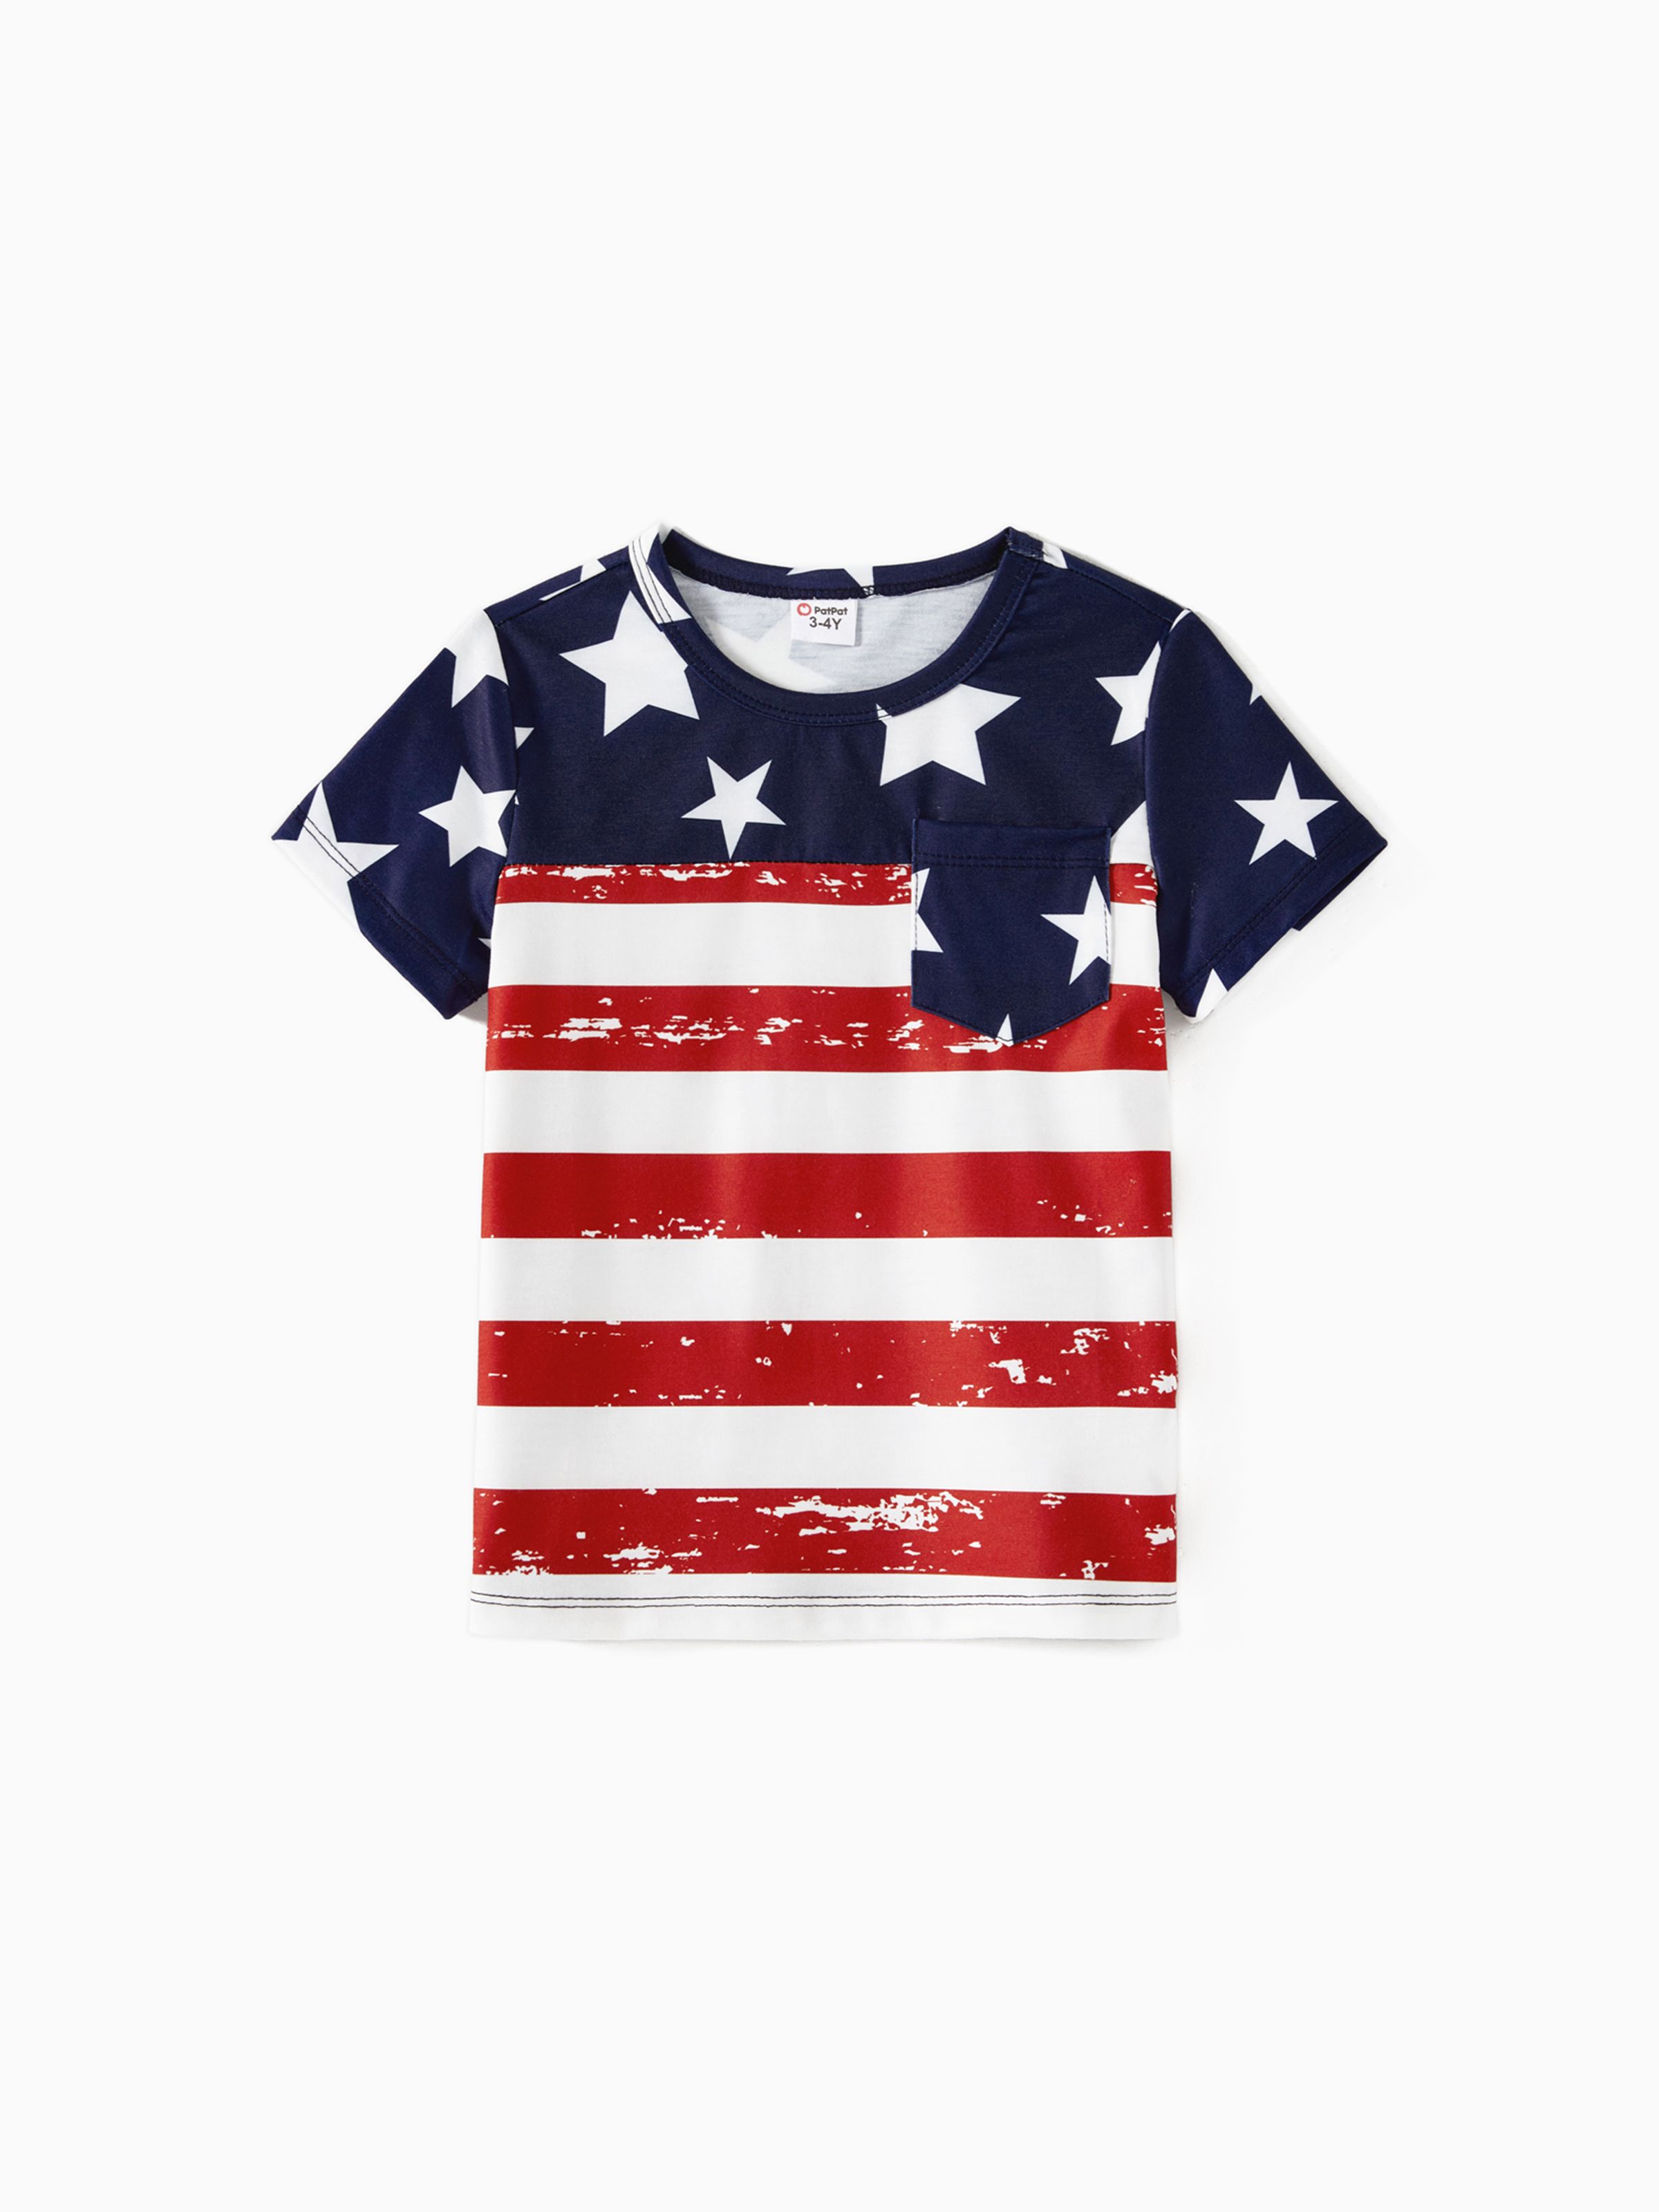 

Independence Day Family Matching Stars & Striped Print Spliced Mesh Tank Dresses and Short-sleeve T-shirts Sets